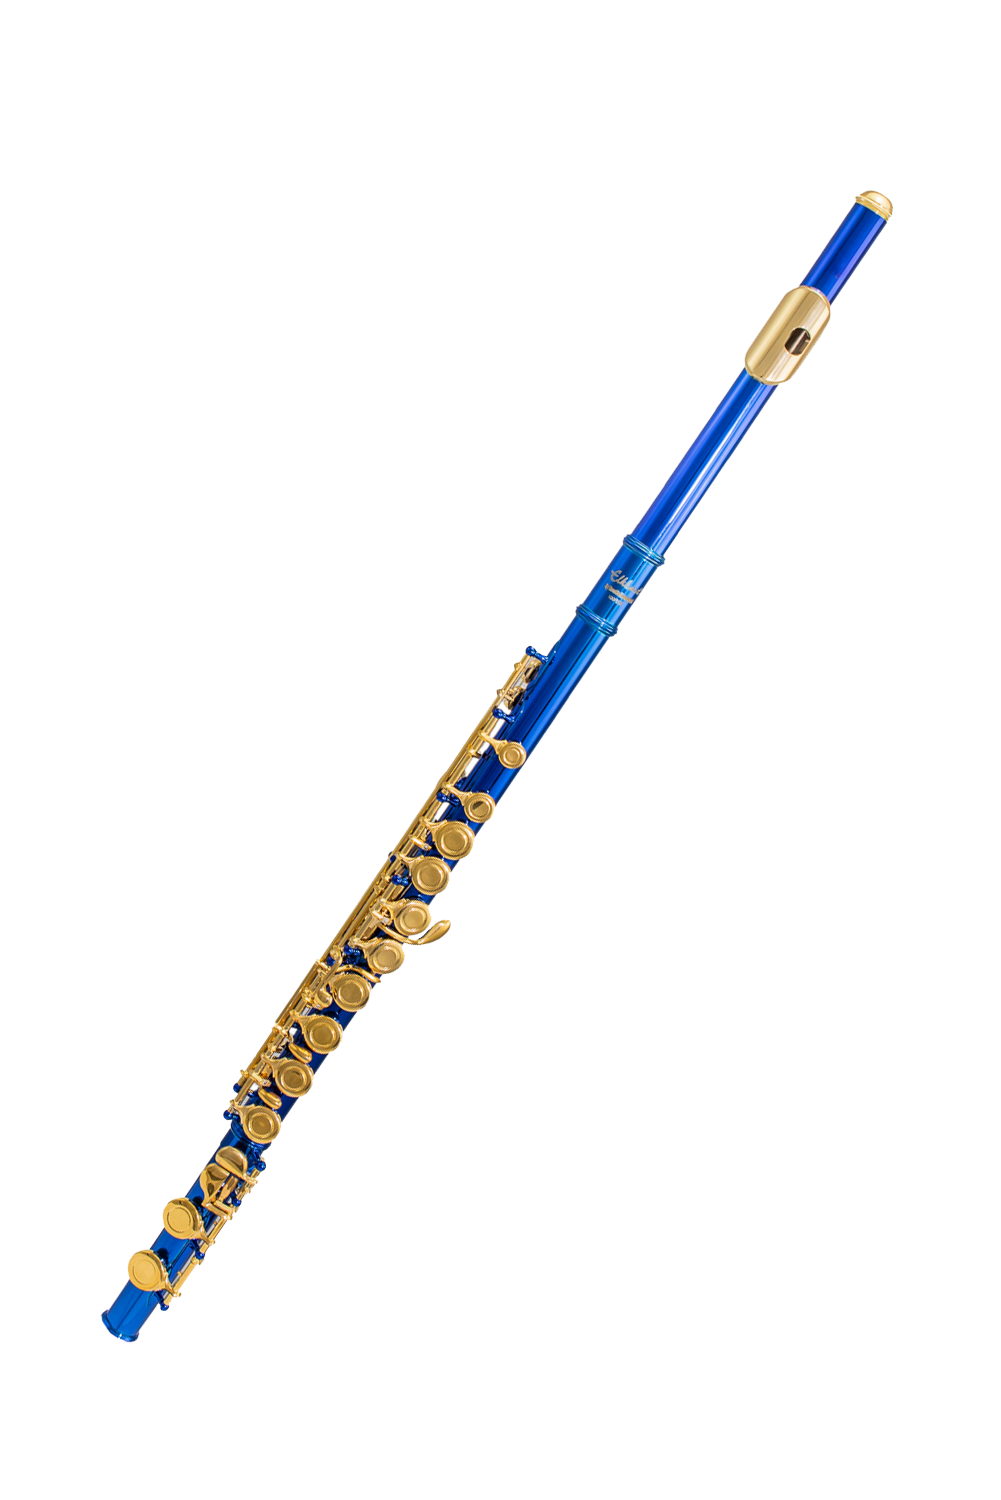 Elkhart by Vincent Bach Flute 100FLBL with Case in Blue | Spilt E Mechanism Offset G - RRP £279 Buy Now in Sale At Half Price For £139 - Only Few Left!